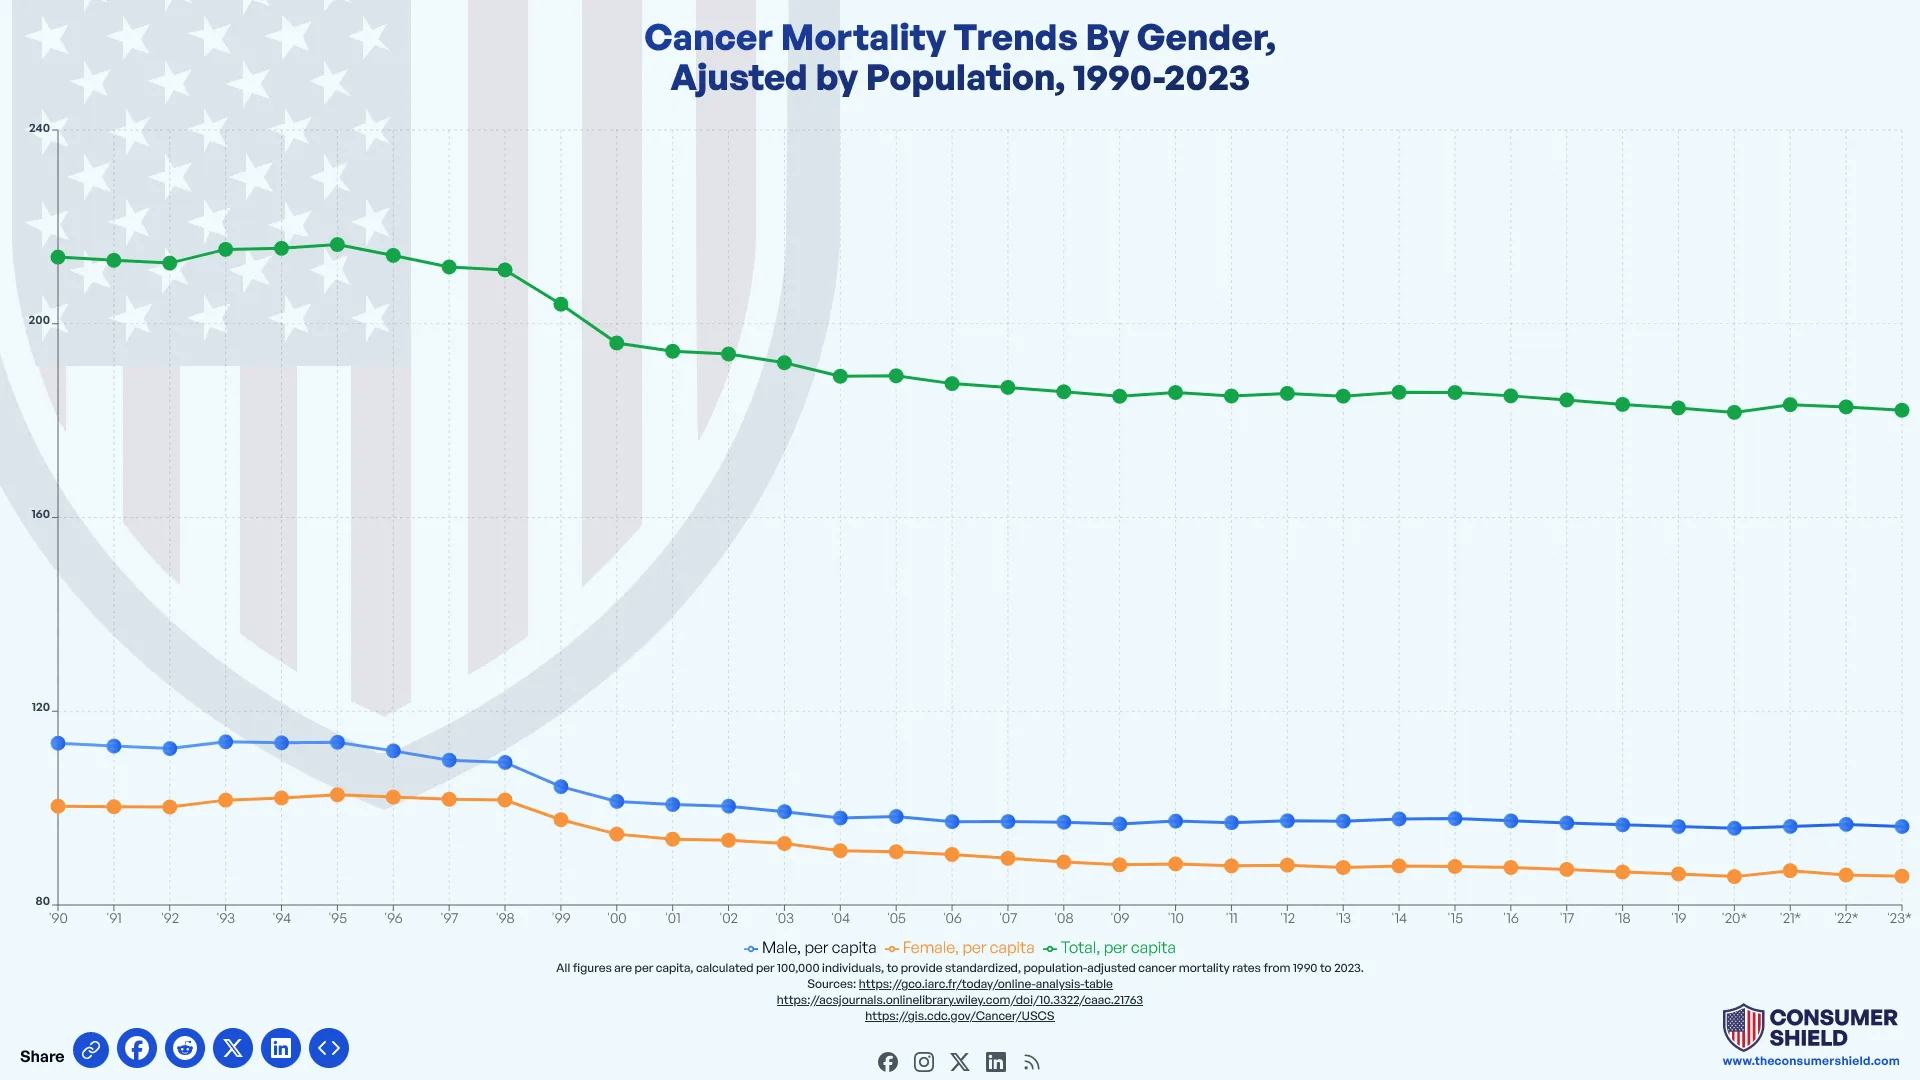 How Many People Die from Cancer Each Year (1990-2023)